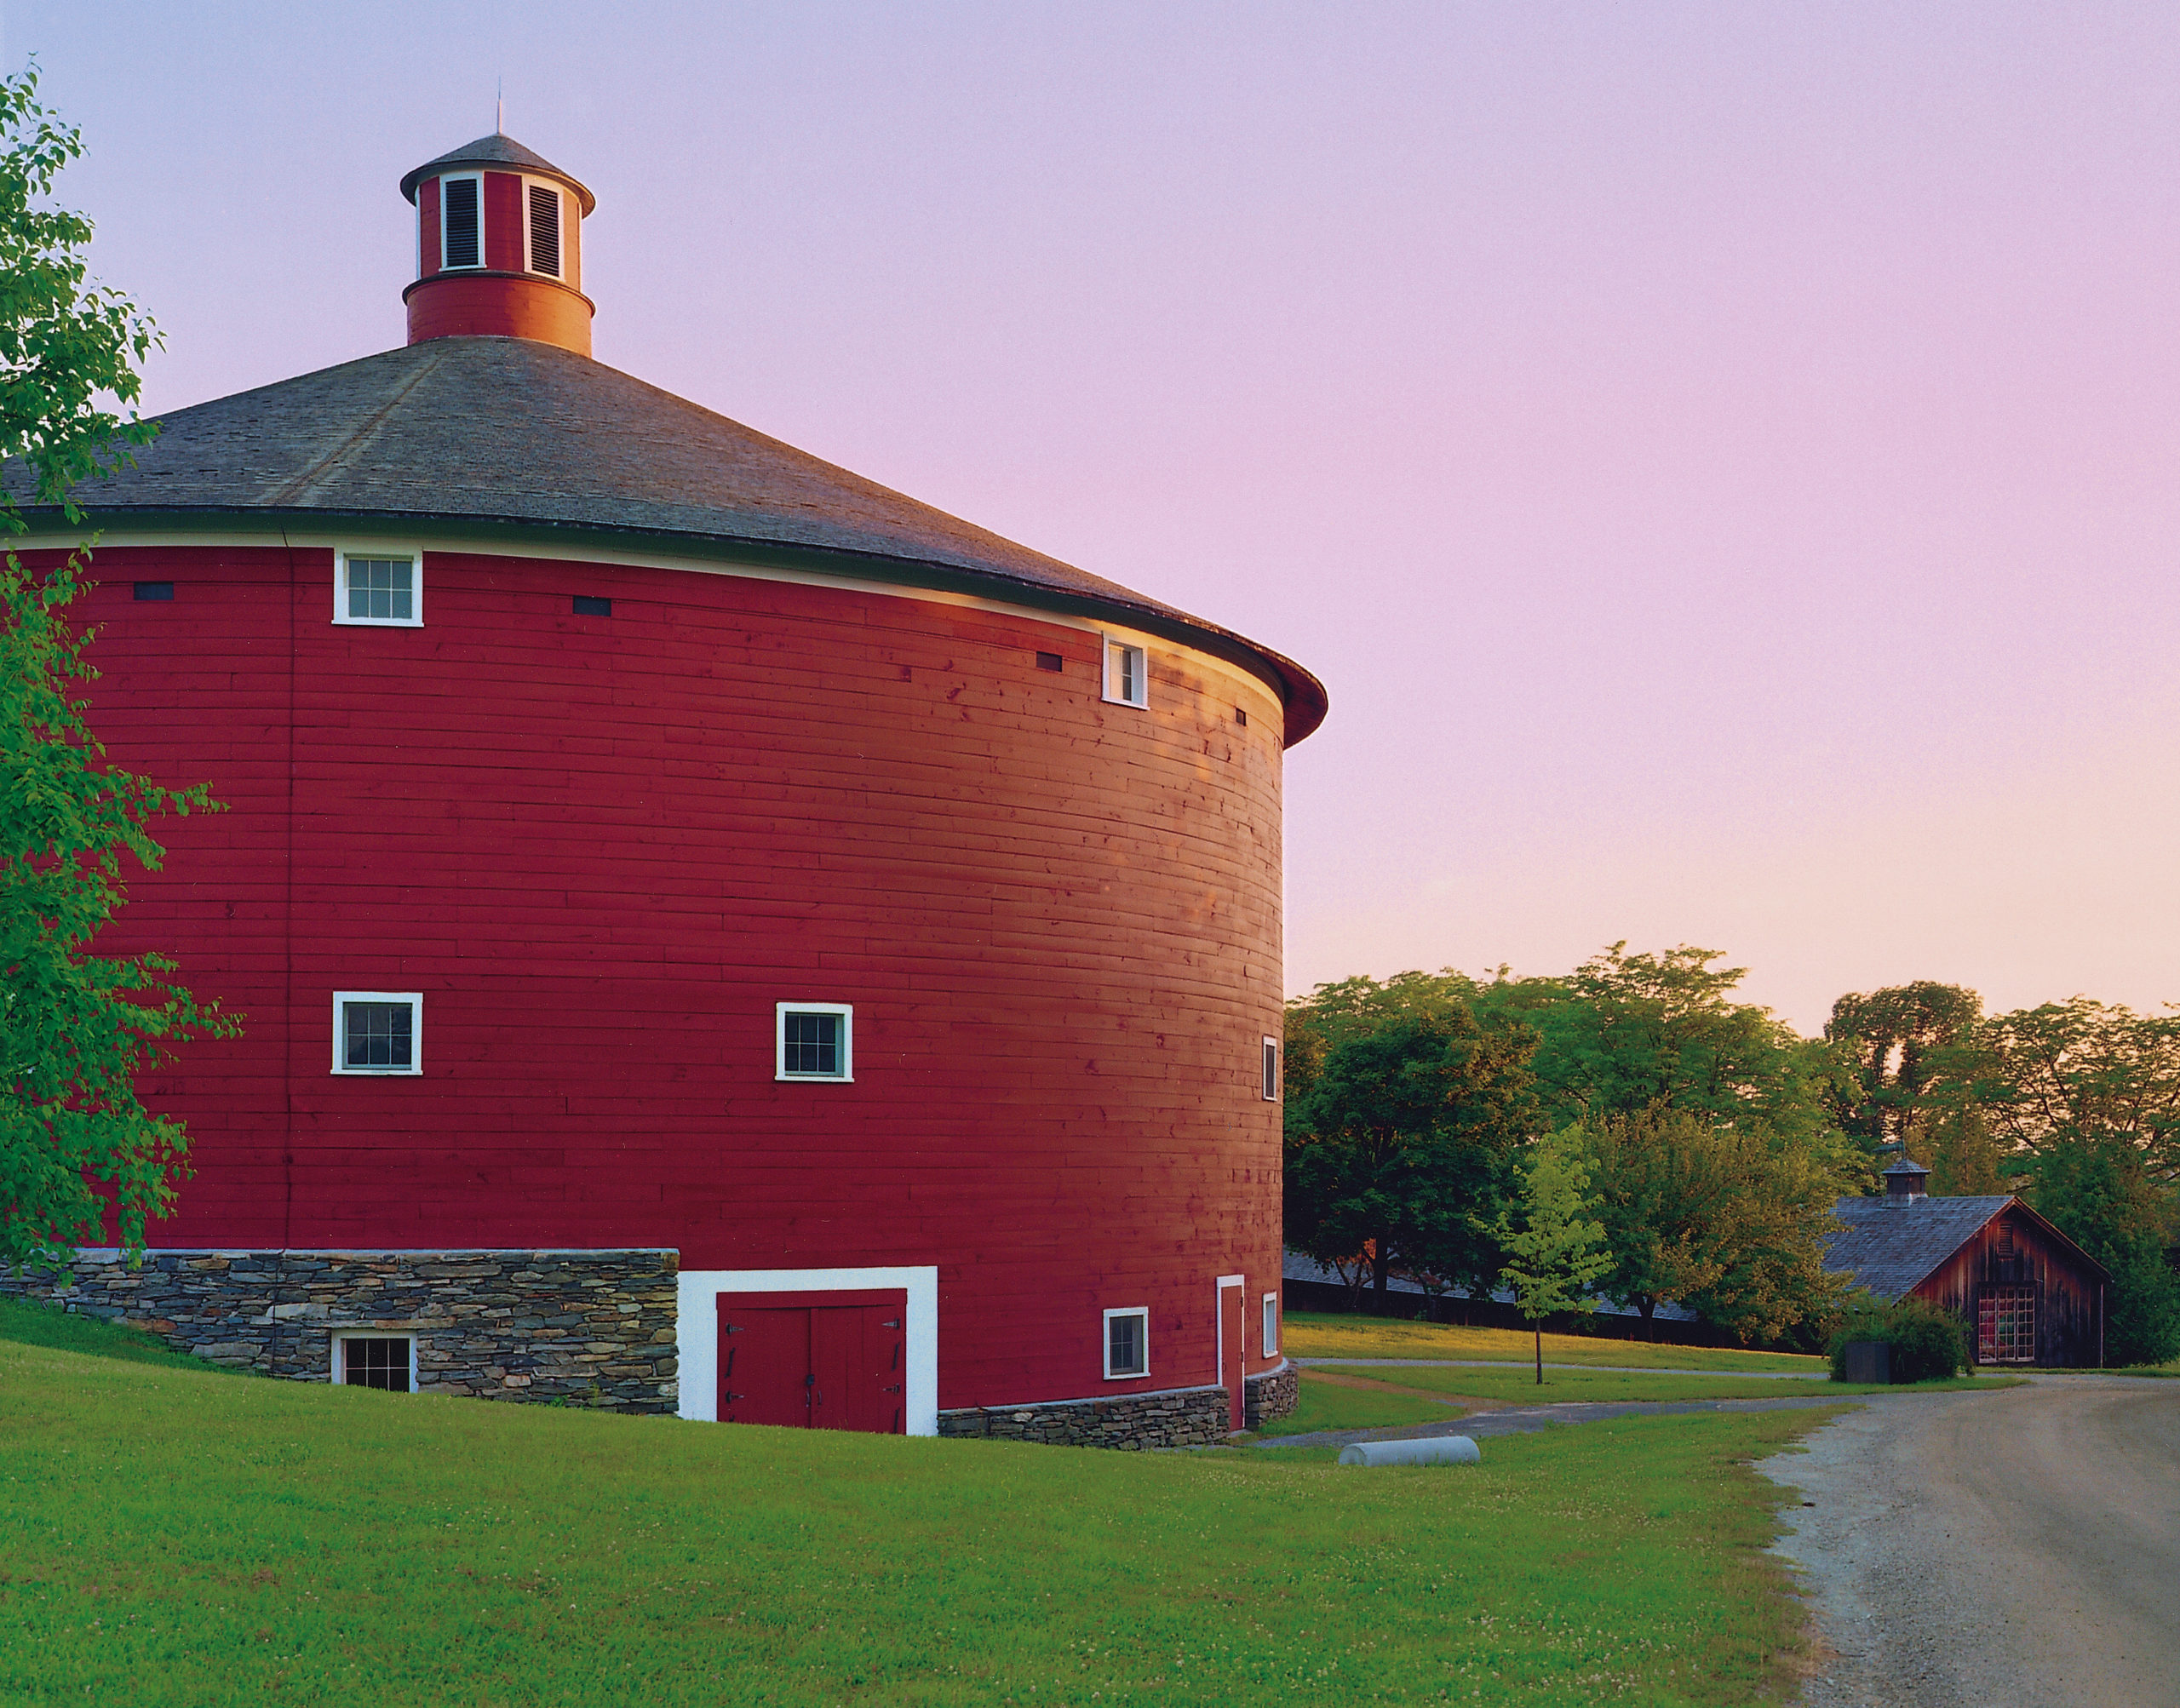 Shelburne Museum Celebrates Art Museum Day on May 18 with Half-price Admission